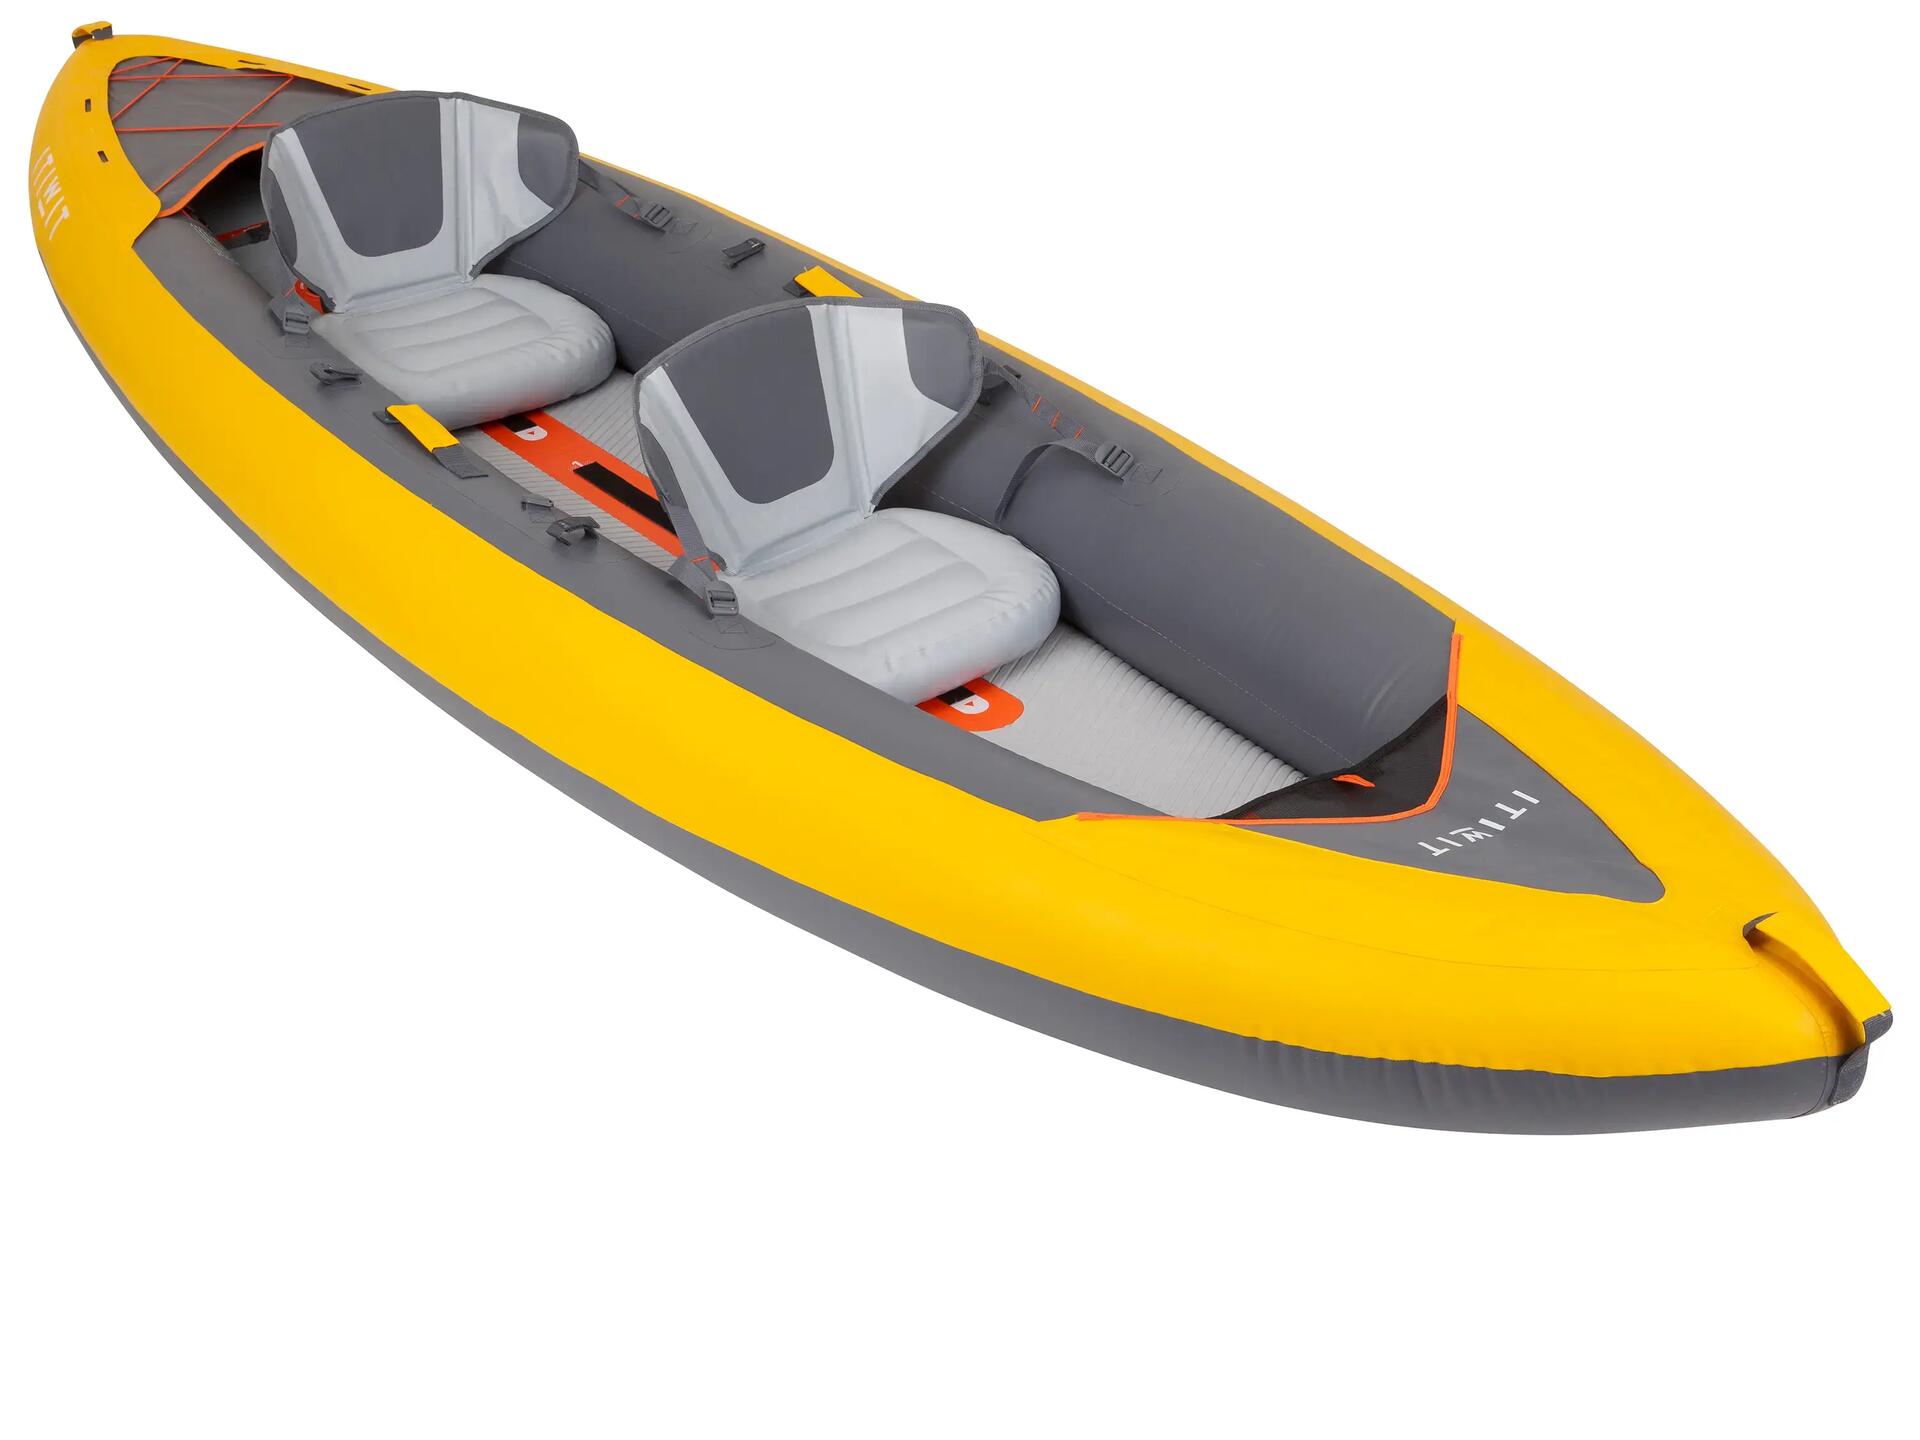 ALLROUND INFLATABLE STAND-UP PADDLE BOARD X100: user guide, repairs, spare parts